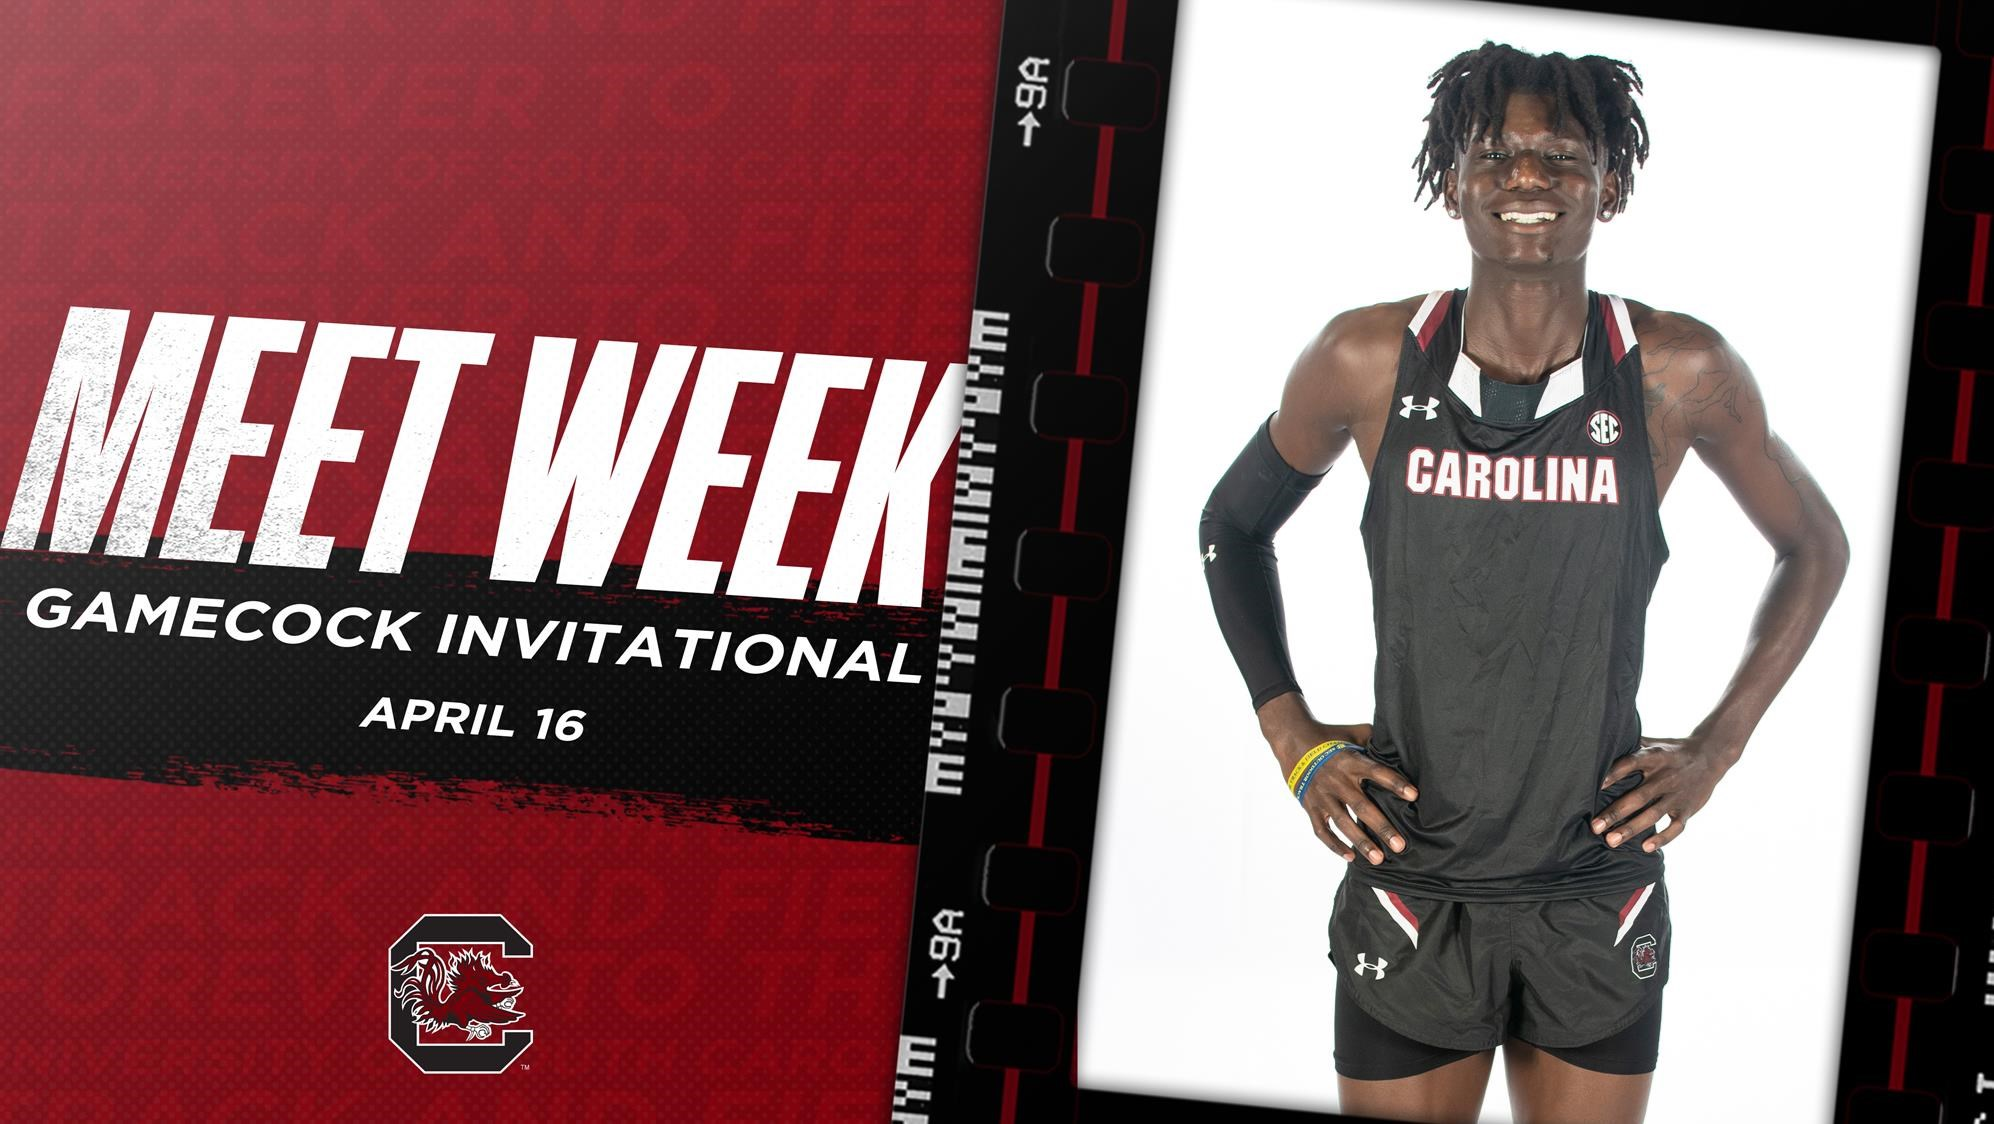 Carolina Track and Field Returns Home for Gamecock Invitational